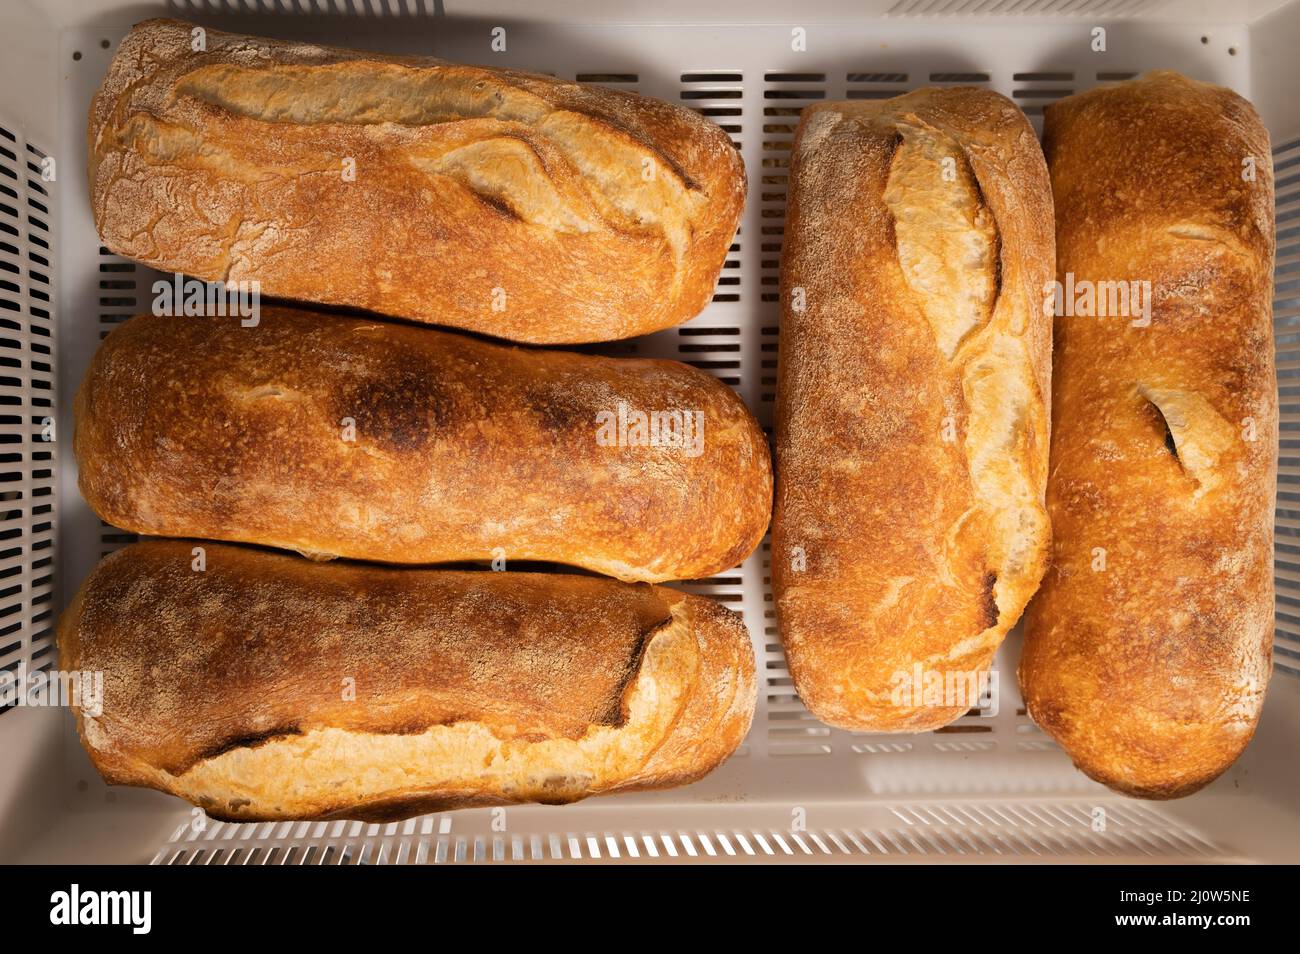 Fresh hot artisan bread in a white plastic transport box. Healthy and tasty food baked goods Stock Photo